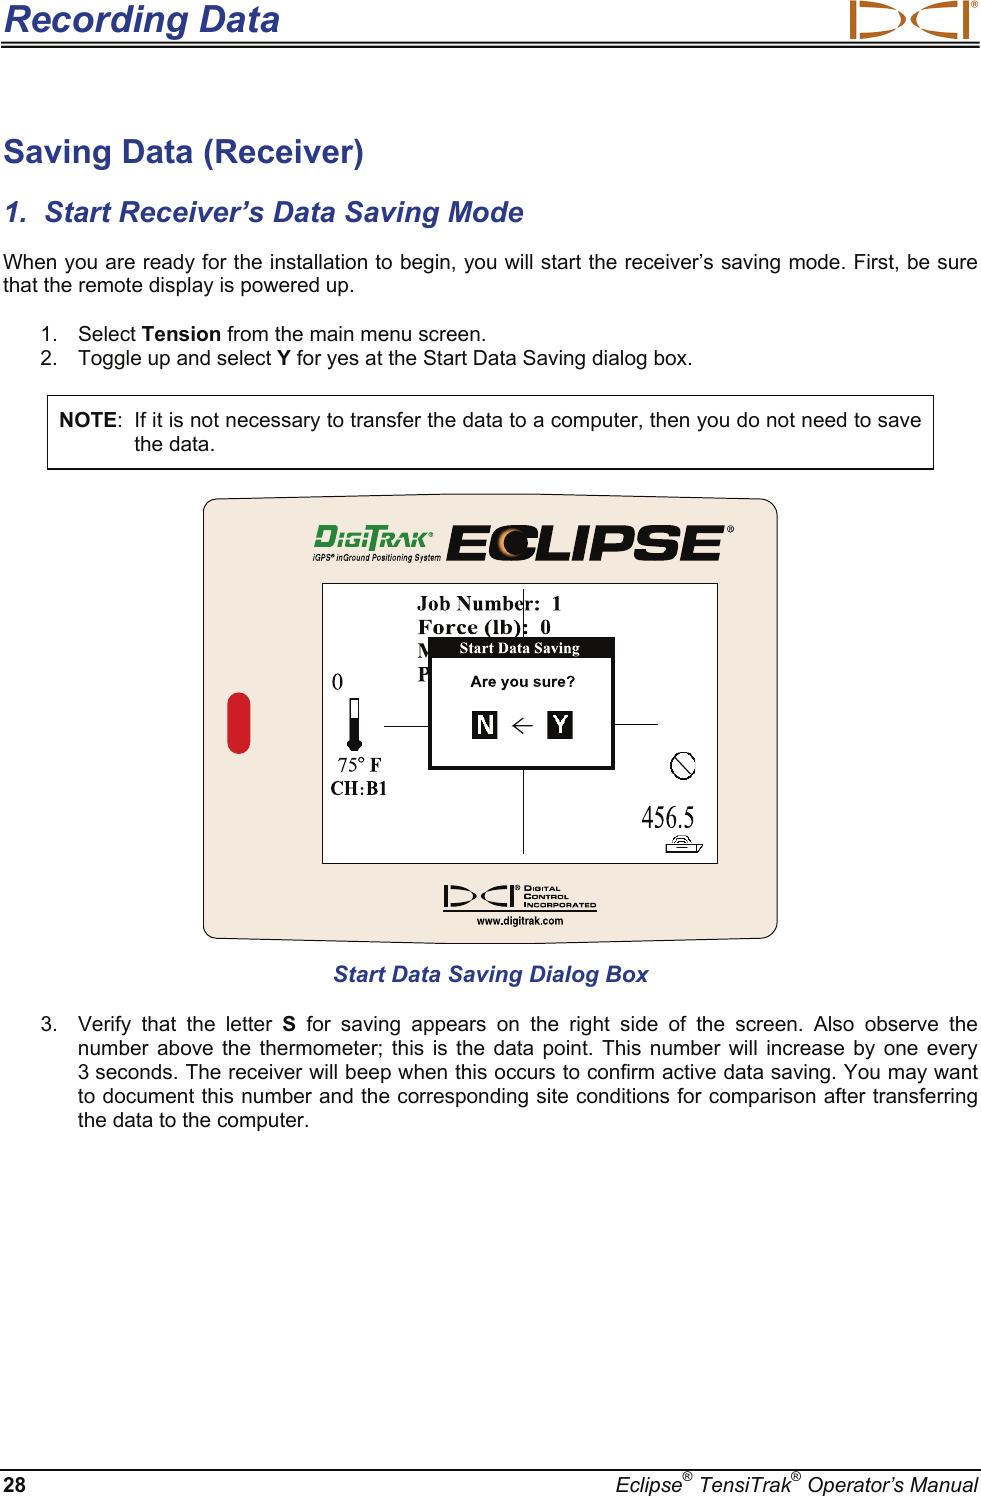 Recording Data  28  Eclipse® TensiTrak® Operator’s Manual Saving Data (Receiver) 1.  Start Receiver’s Data Saving Mode When you are ready for the installation to begin, you will start the receiver’s saving mode. First, be sure that the remote display is powered up. 1. Select Tension from the main menu screen.   2.  Toggle up and select Y for yes at the Start Data Saving dialog box.  NOTE:  If it is not necessary to transfer the data to a computer, then you do not need to save the data.   Start Data Saving Dialog Box 3.  Verify that the letter S for saving appears on the right side of the screen. Also observe the number above the thermometer; this is the data point. This number will increase by one every 3 seconds. The receiver will beep when this occurs to confirm active data saving. You may want to document this number and the corresponding site conditions for comparison after transferring the data to the computer. 